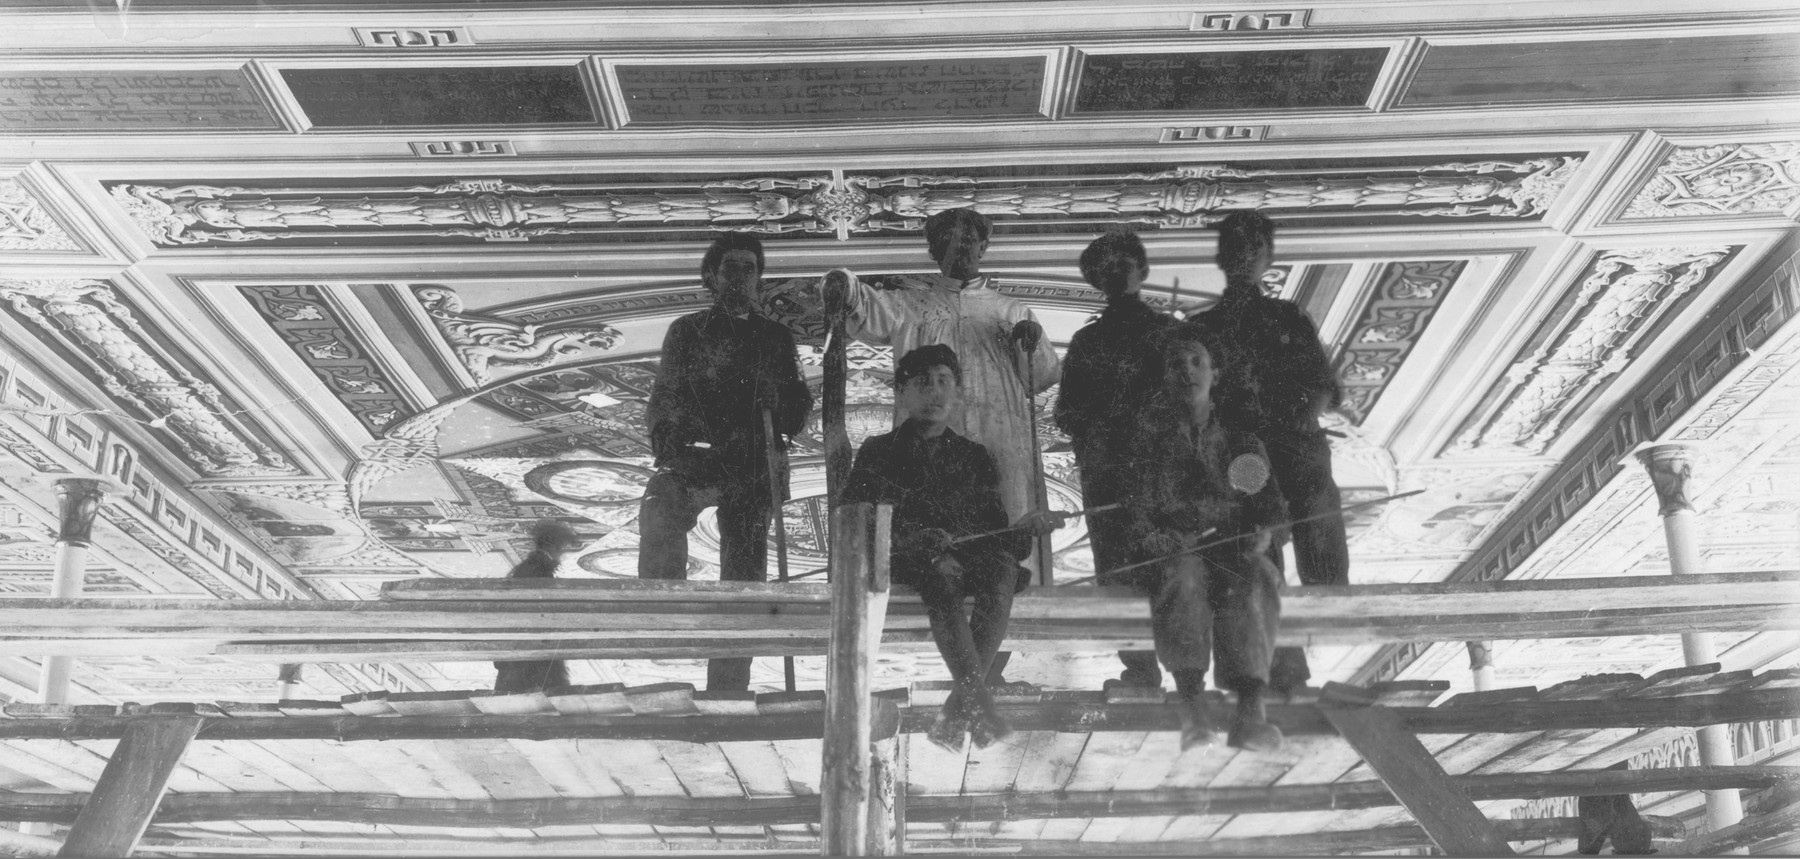 Perec Willenberg (pictured center, wearing white) and his staff paint the old synagogue ceiling mural in Czestochowa.